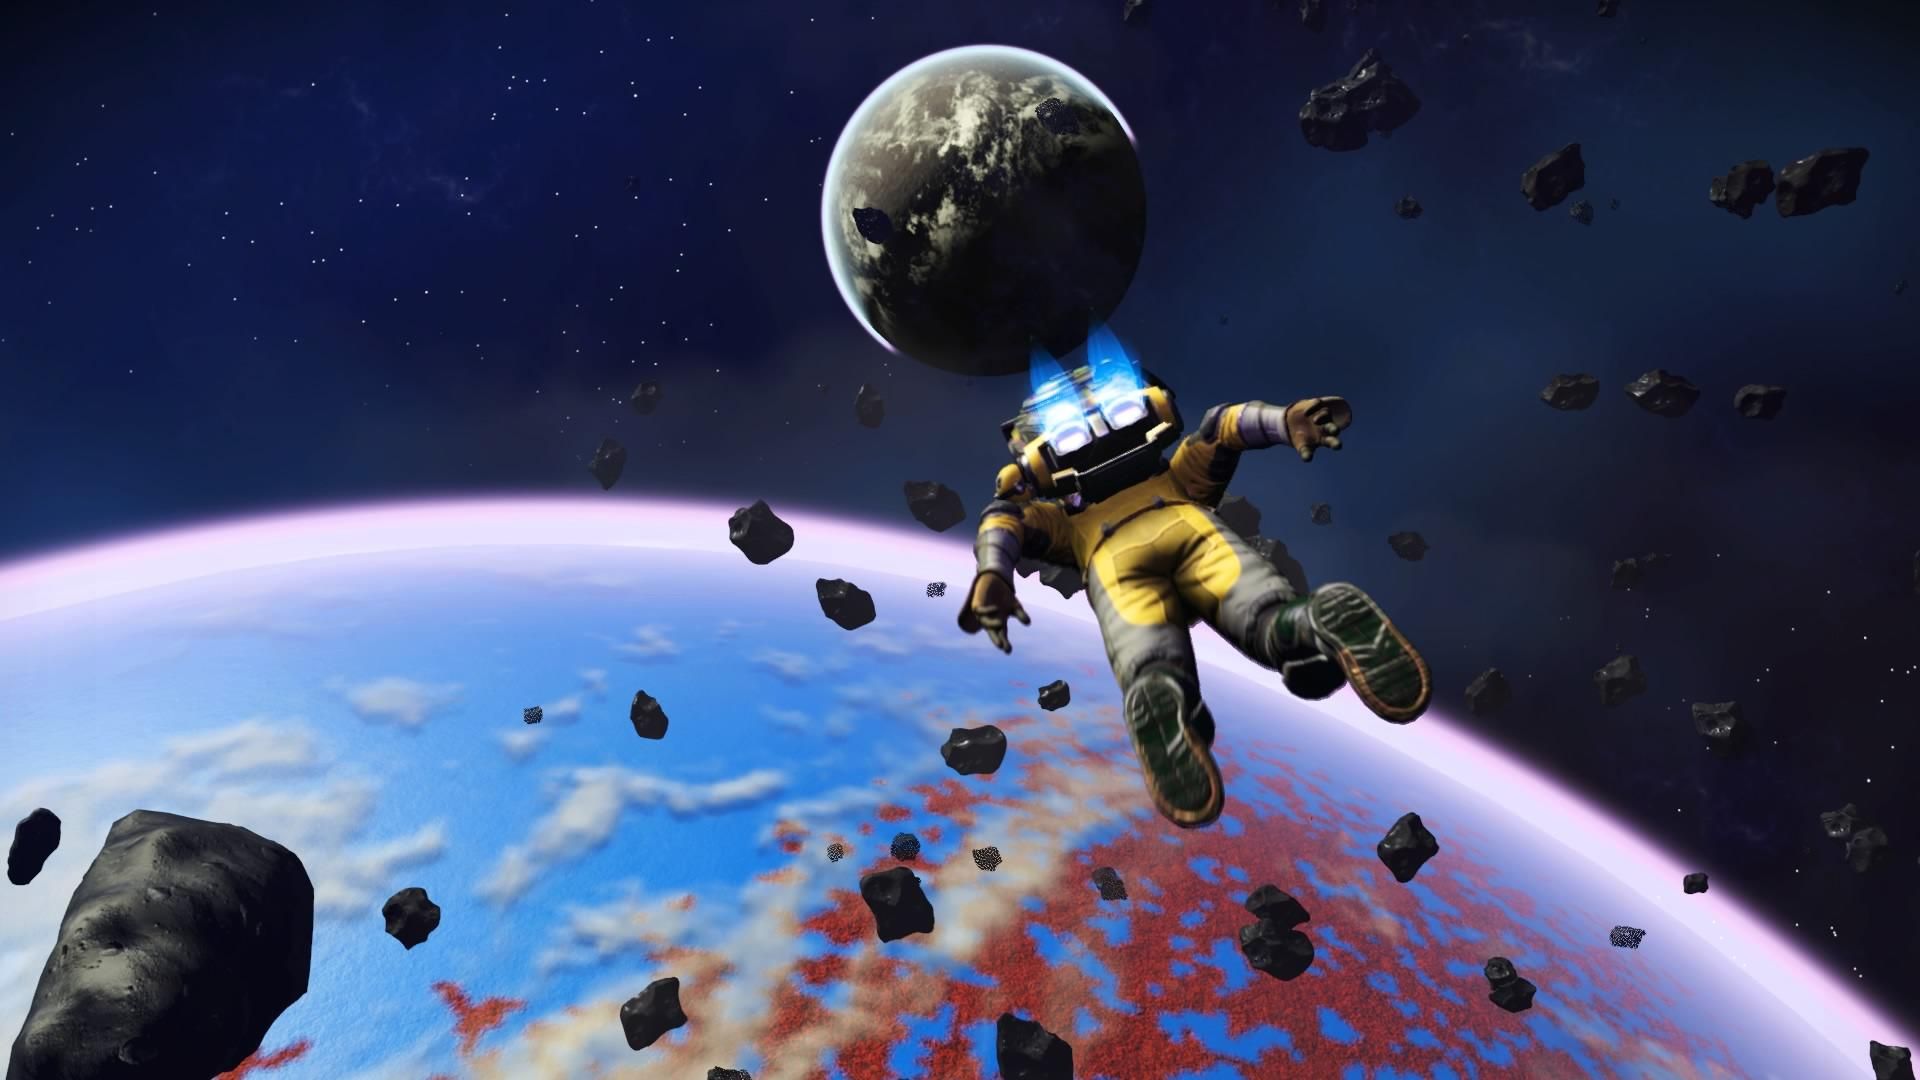 Amazing photos of space as captured in No Mans Sky image 36